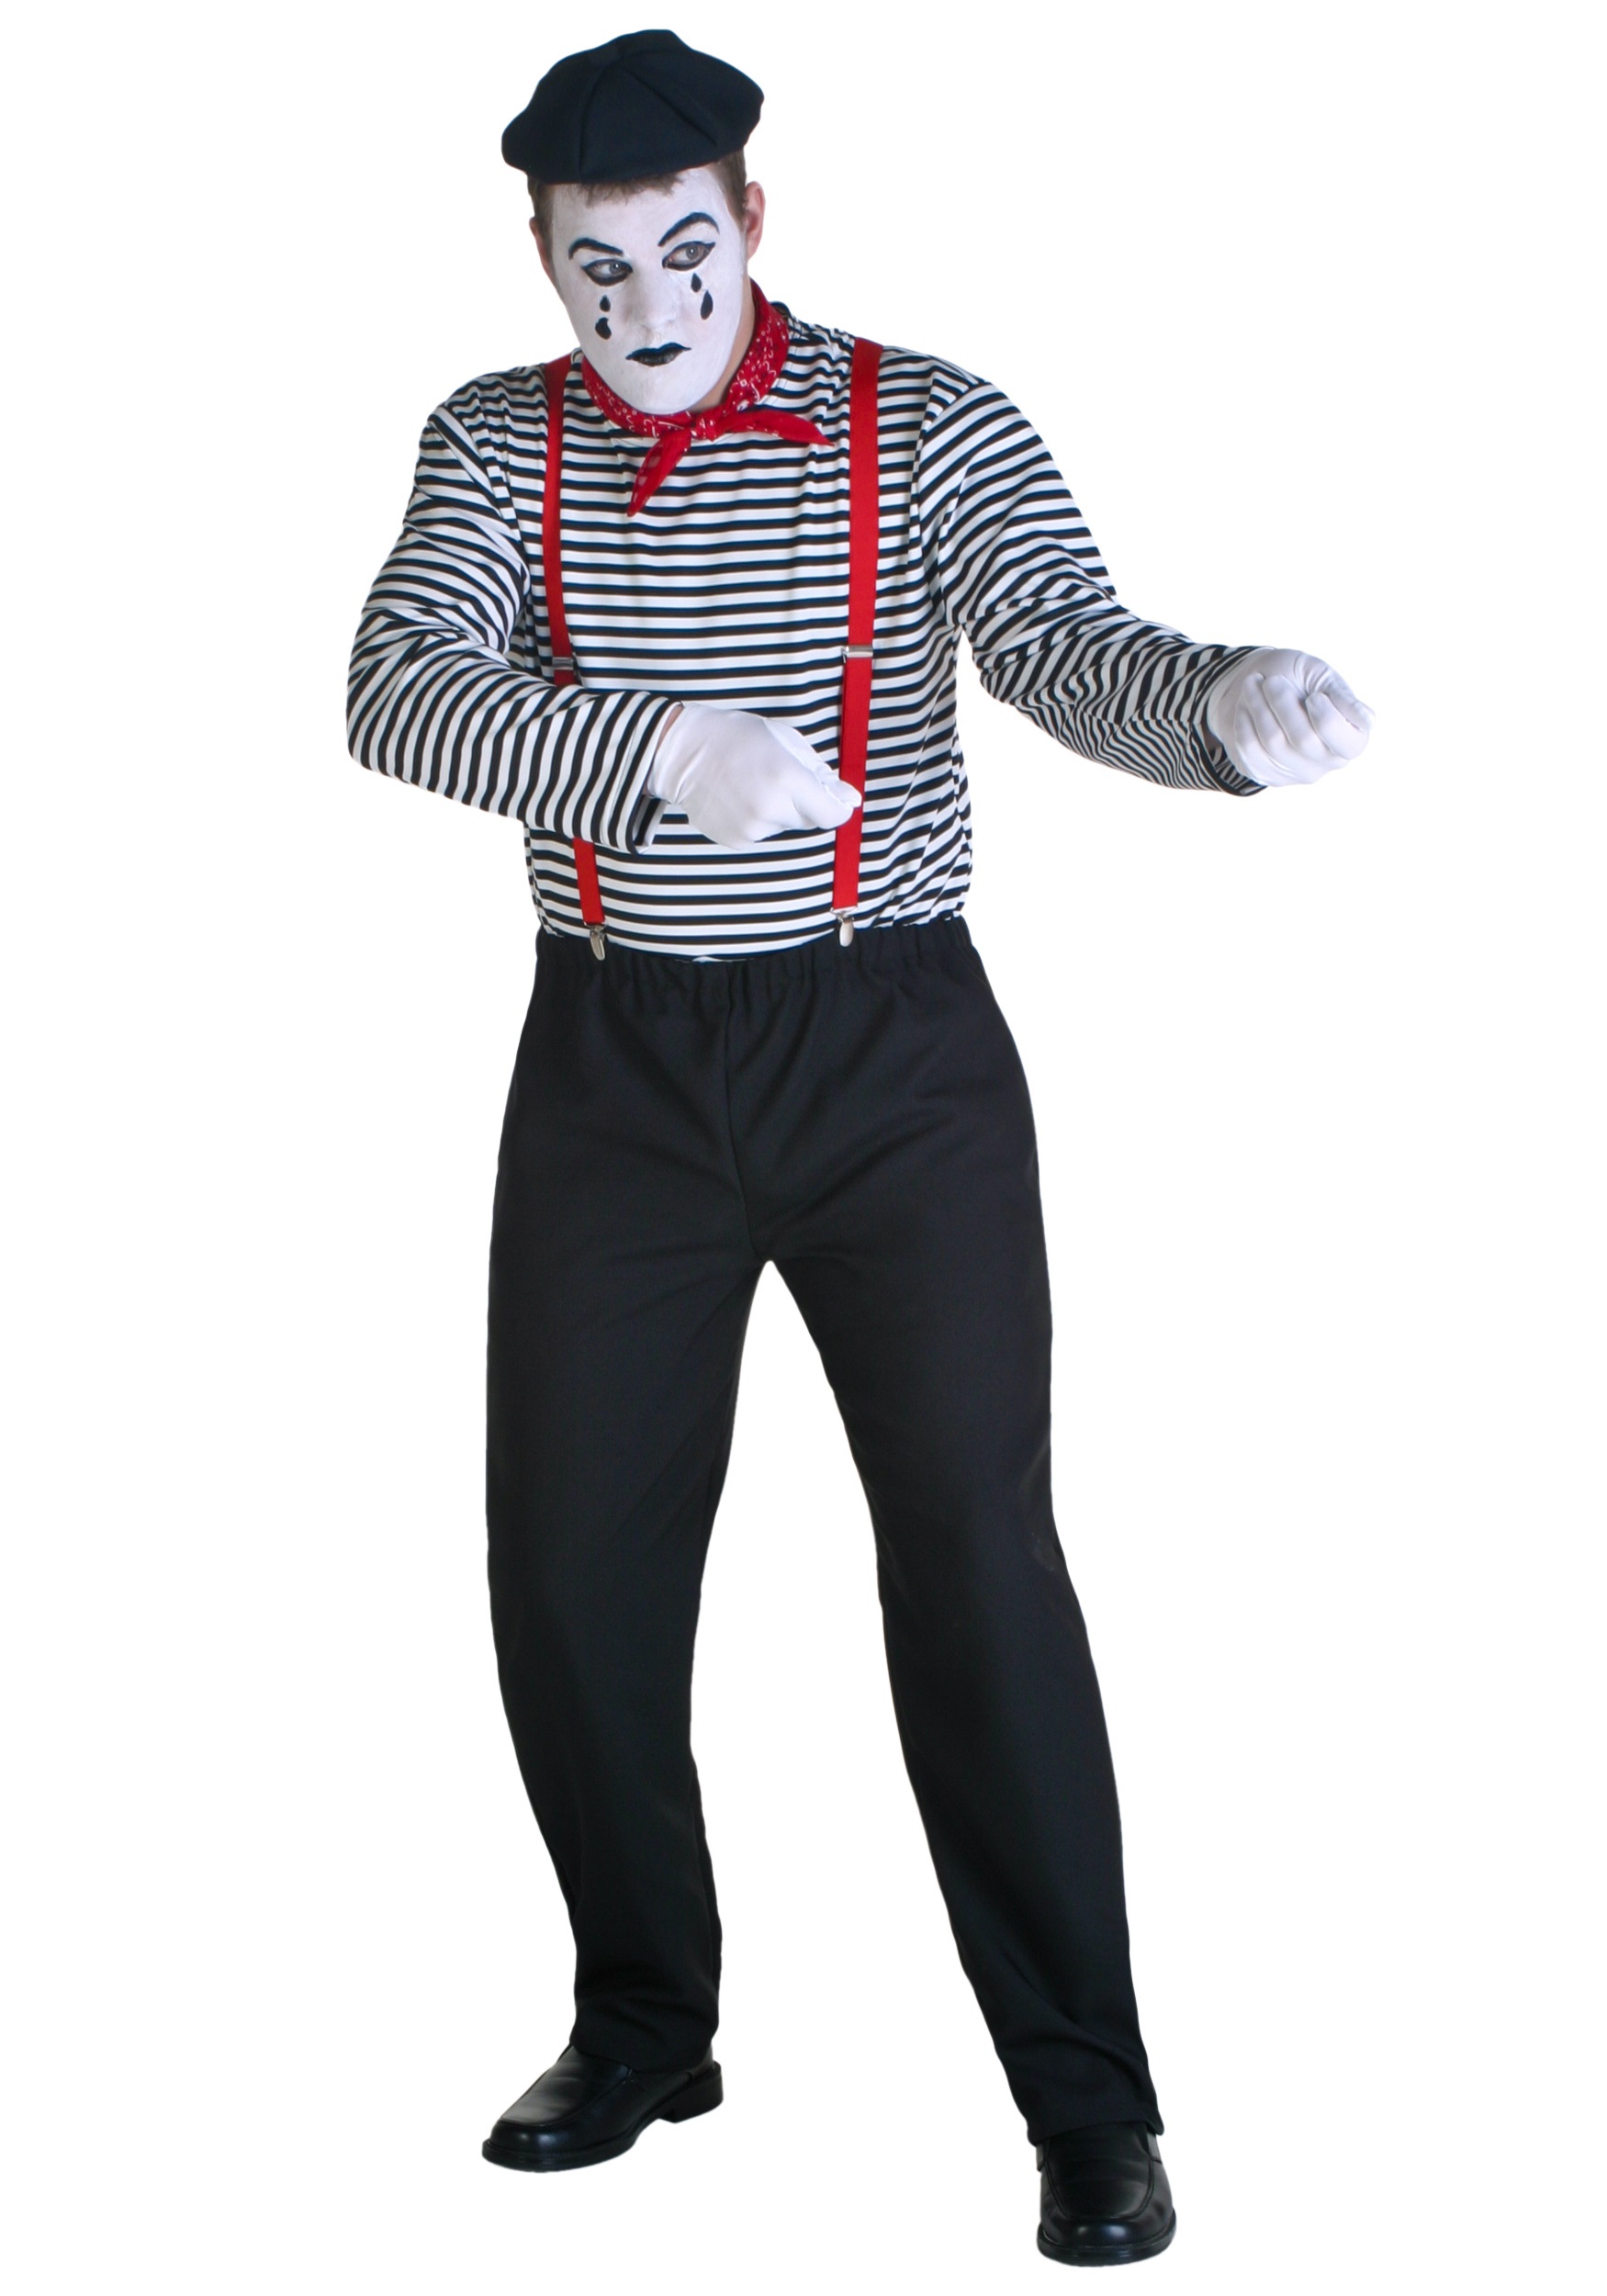 Photos - Fancy Dress FUN Costumes Adult Costume For Adult Size | Adult Costumes Black/Red&#